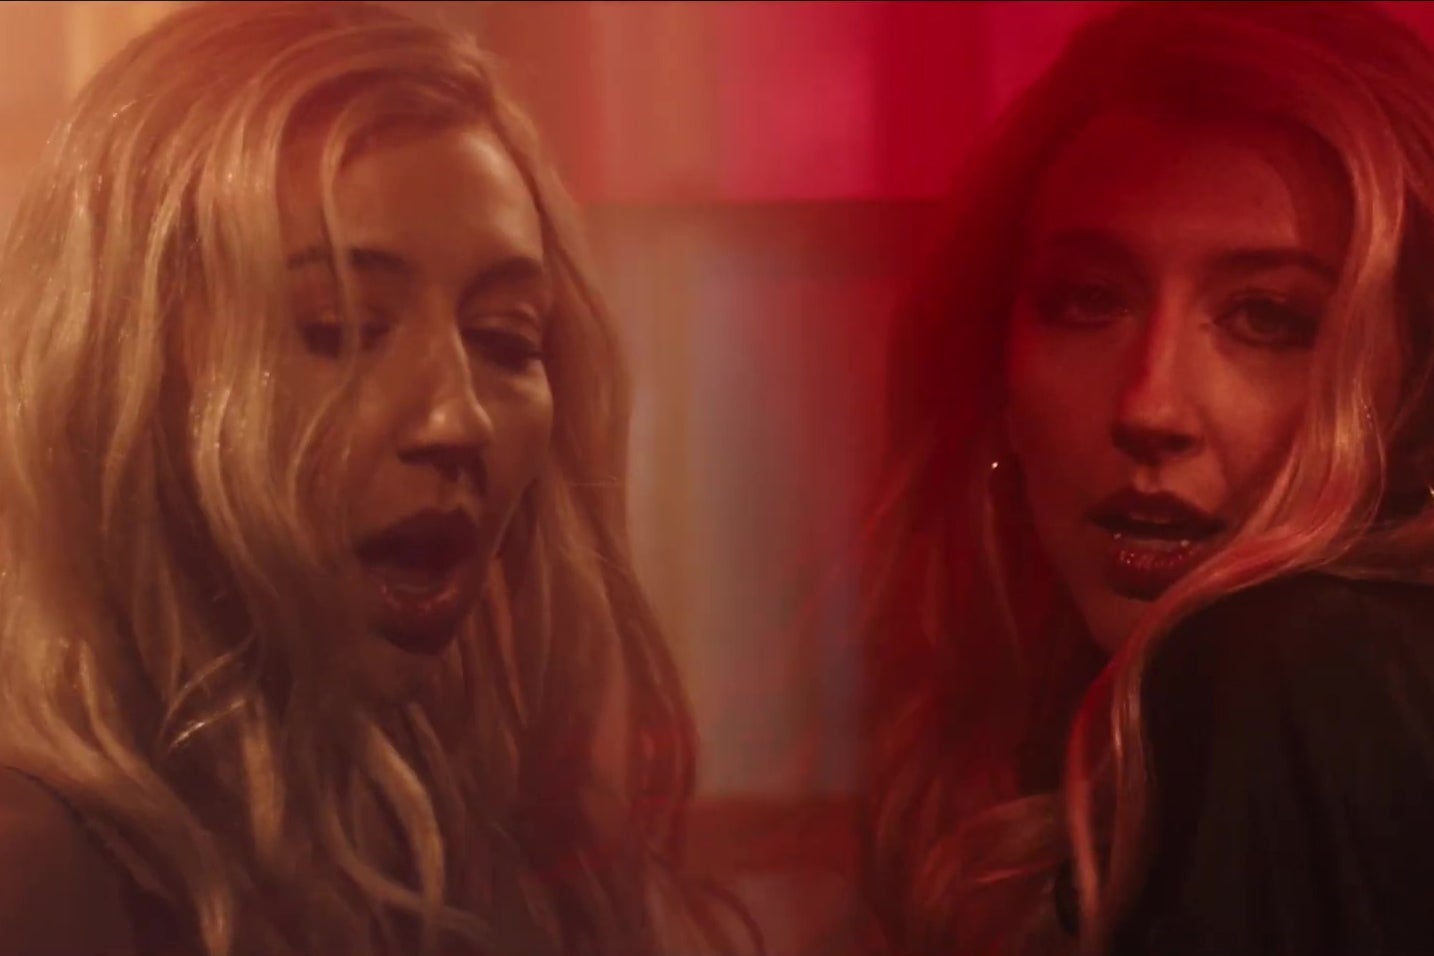 A composite shot consisting of two images of Heidi Gardner making sexy faces.